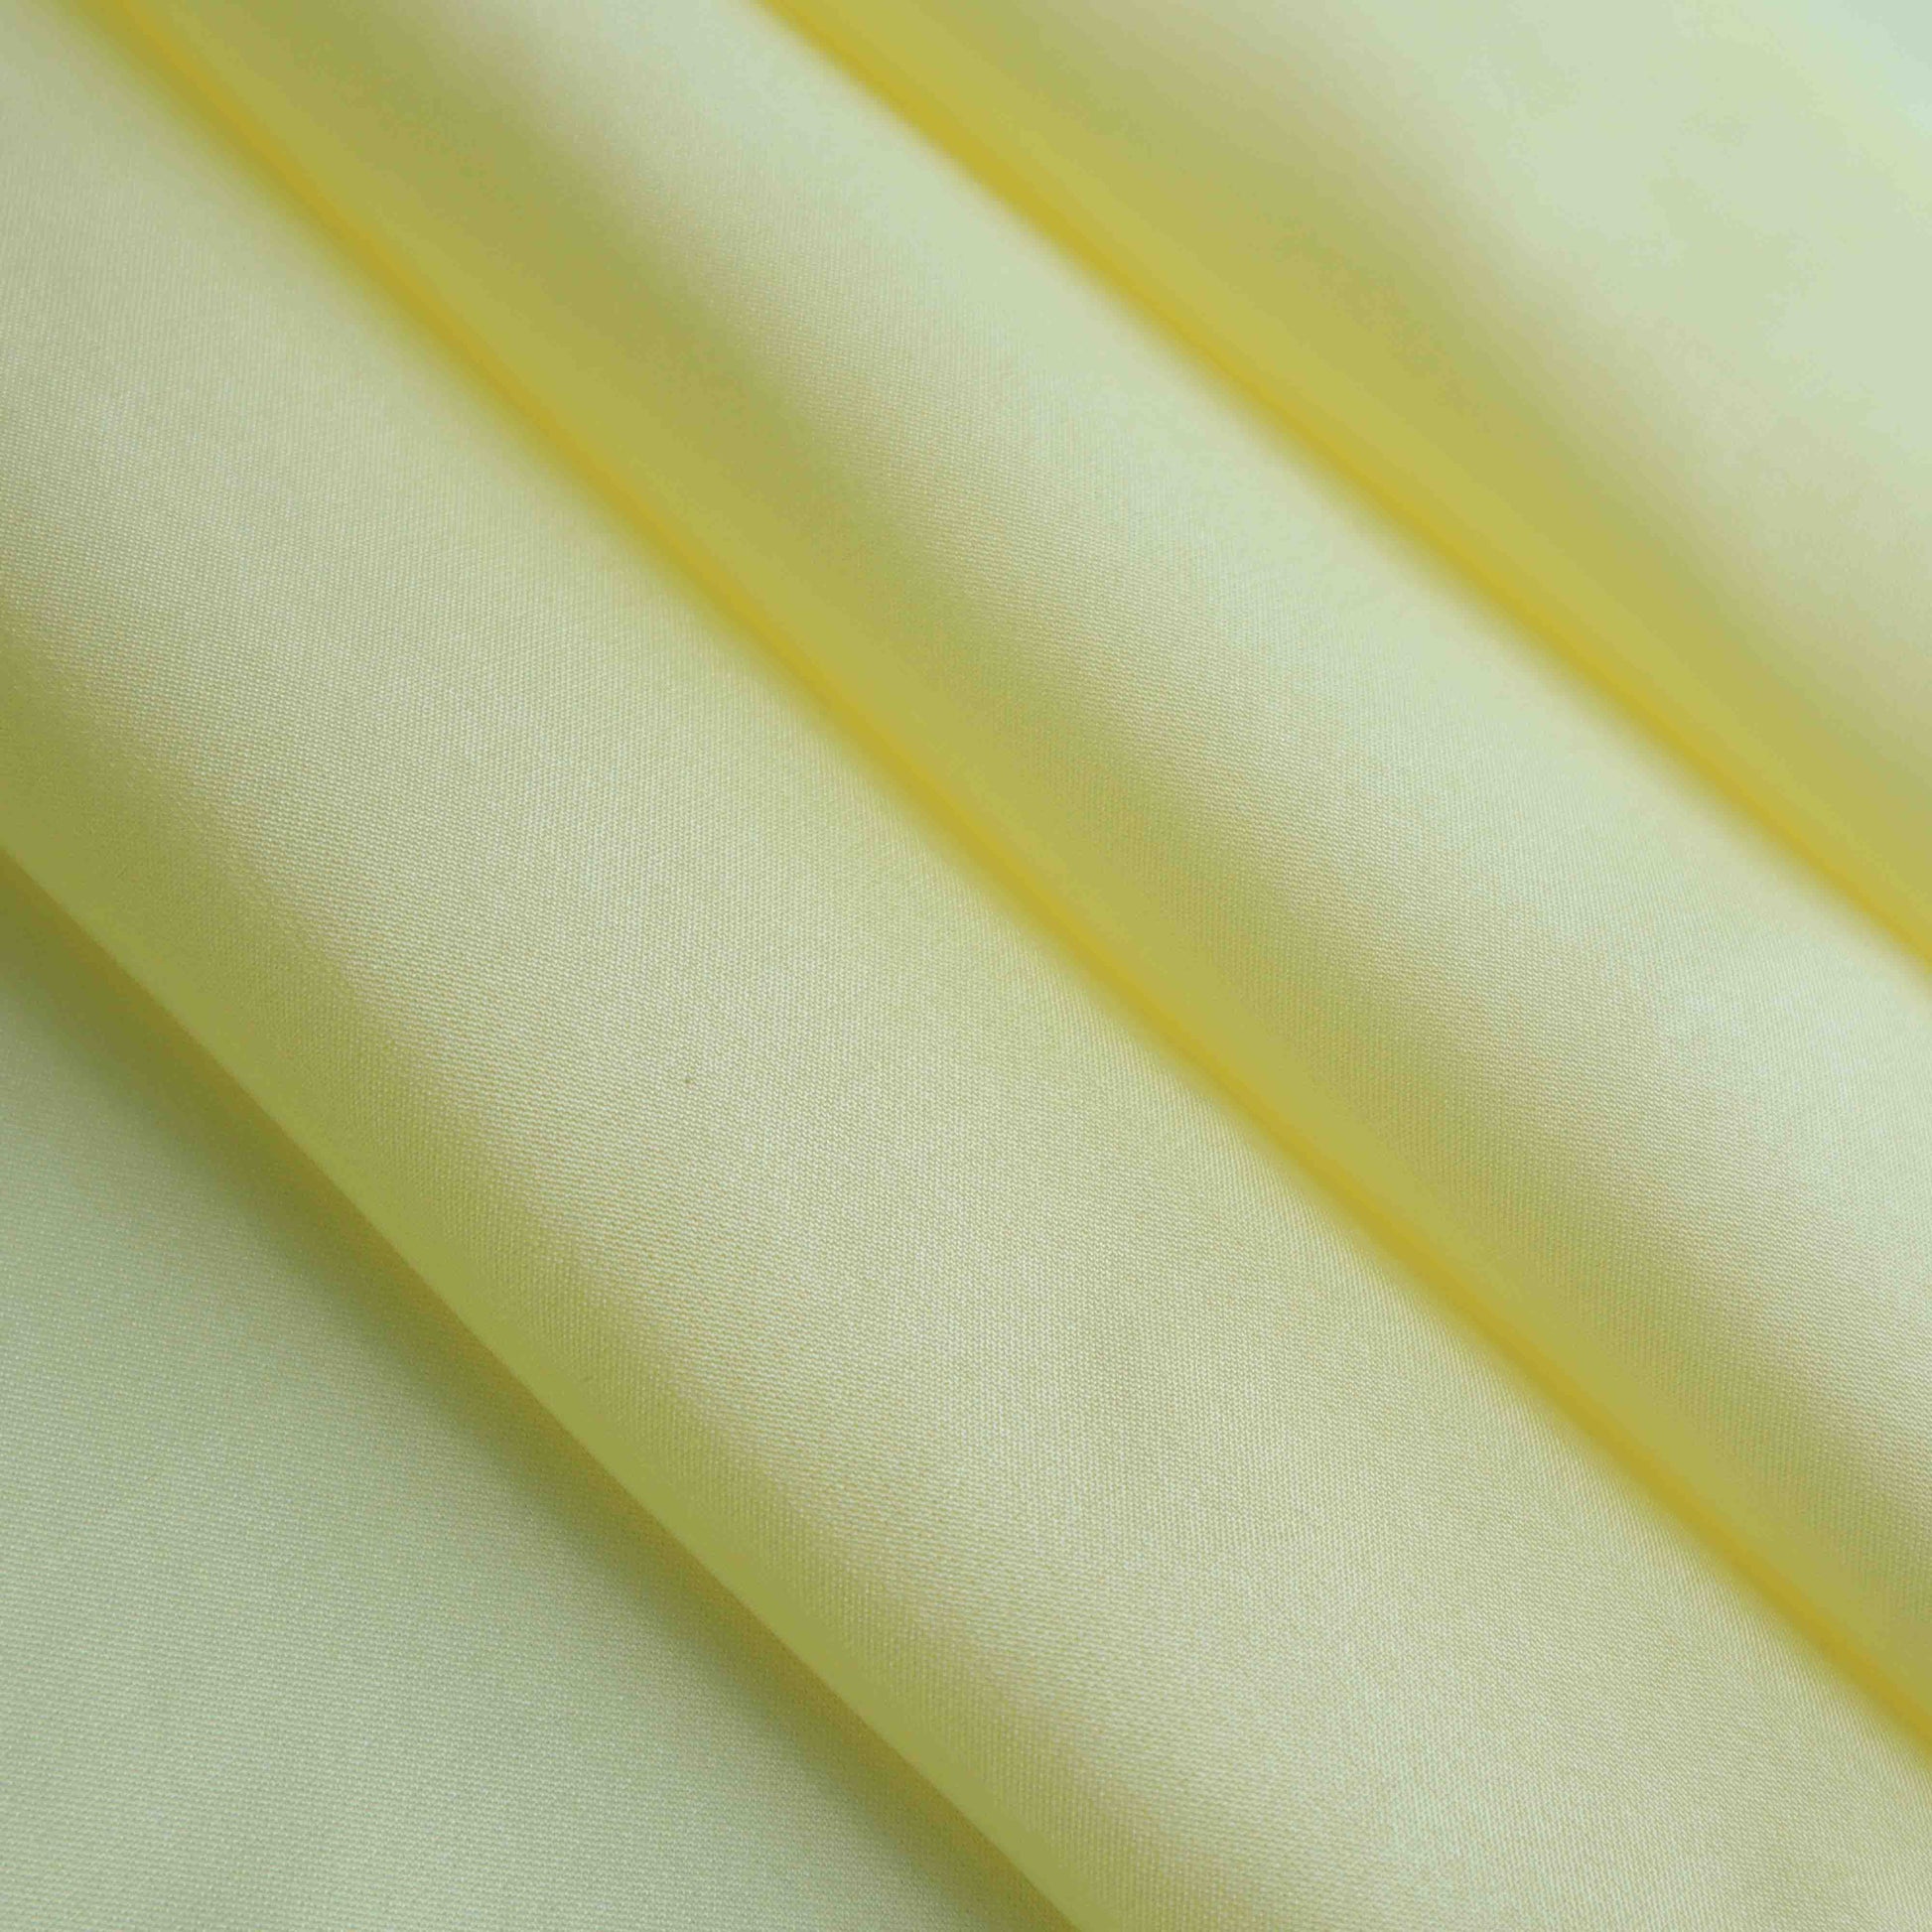 A lightweight Habutai lining made from a Silk blend in Pastel Yellow. This ultralight silk lining comes with an incredibly smooth and cool hand feel. 